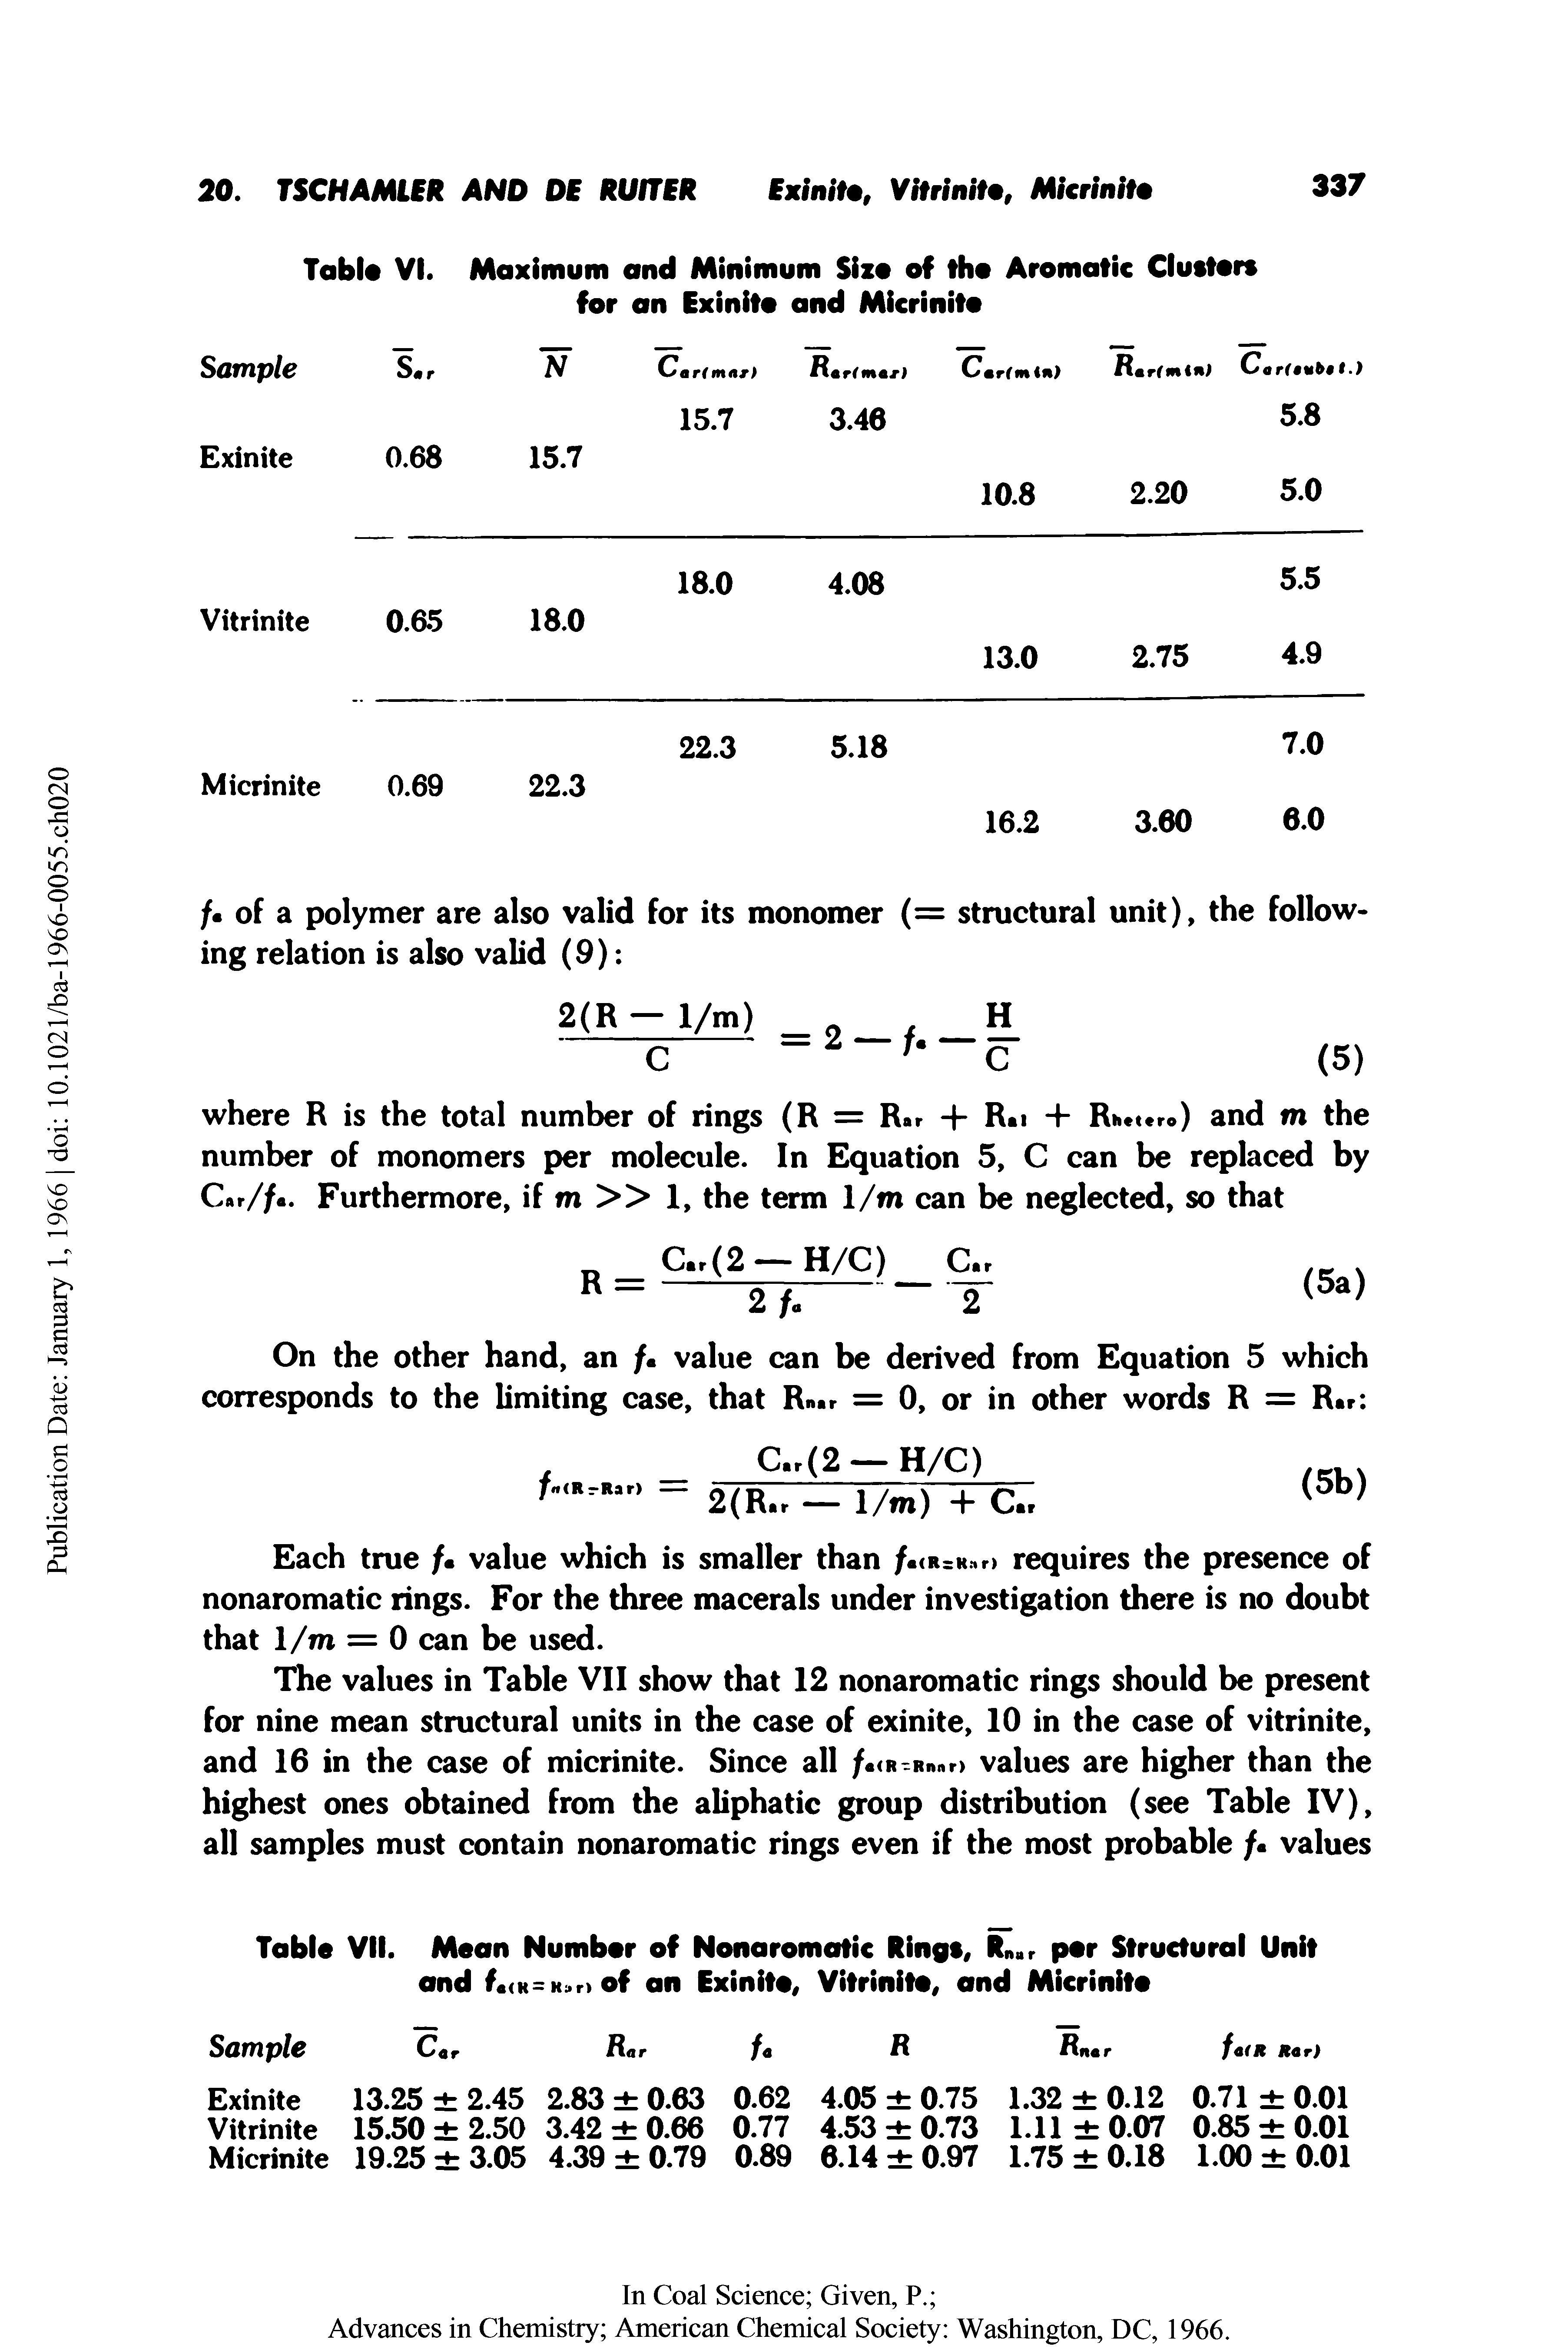 Table VII. Mean Number of Nonaromatic Rings, Rn r per Structural Unit and f <K= k rt of an Exinite, Vitrinite, and Micrinite...